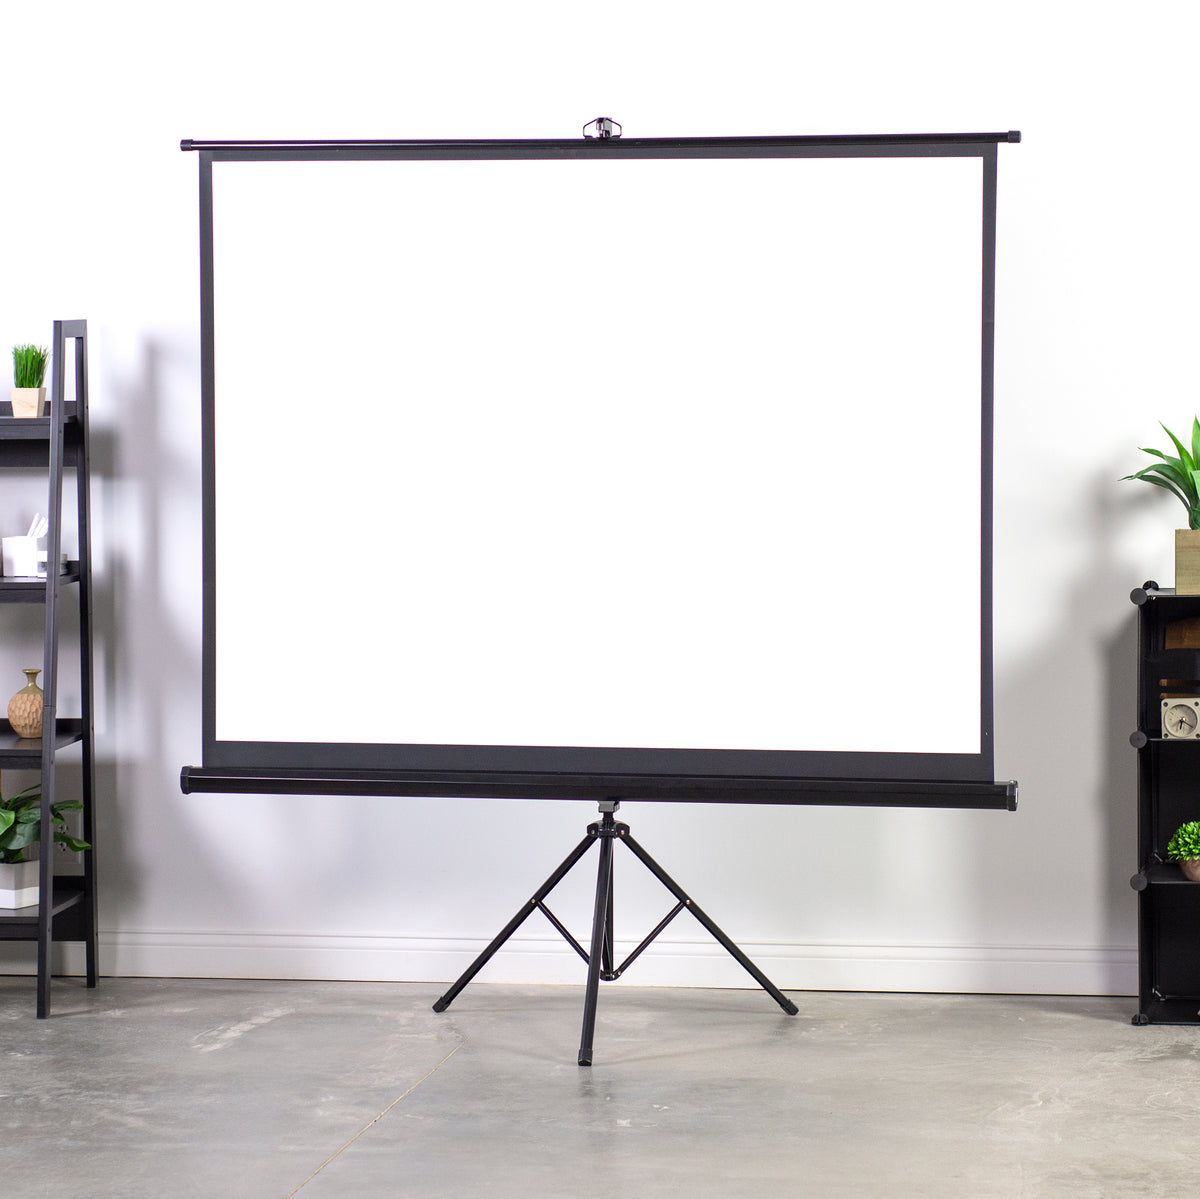 Adjustable 84" 16:9 HD Projector Projection Screen Home Conference Stand Tripod 